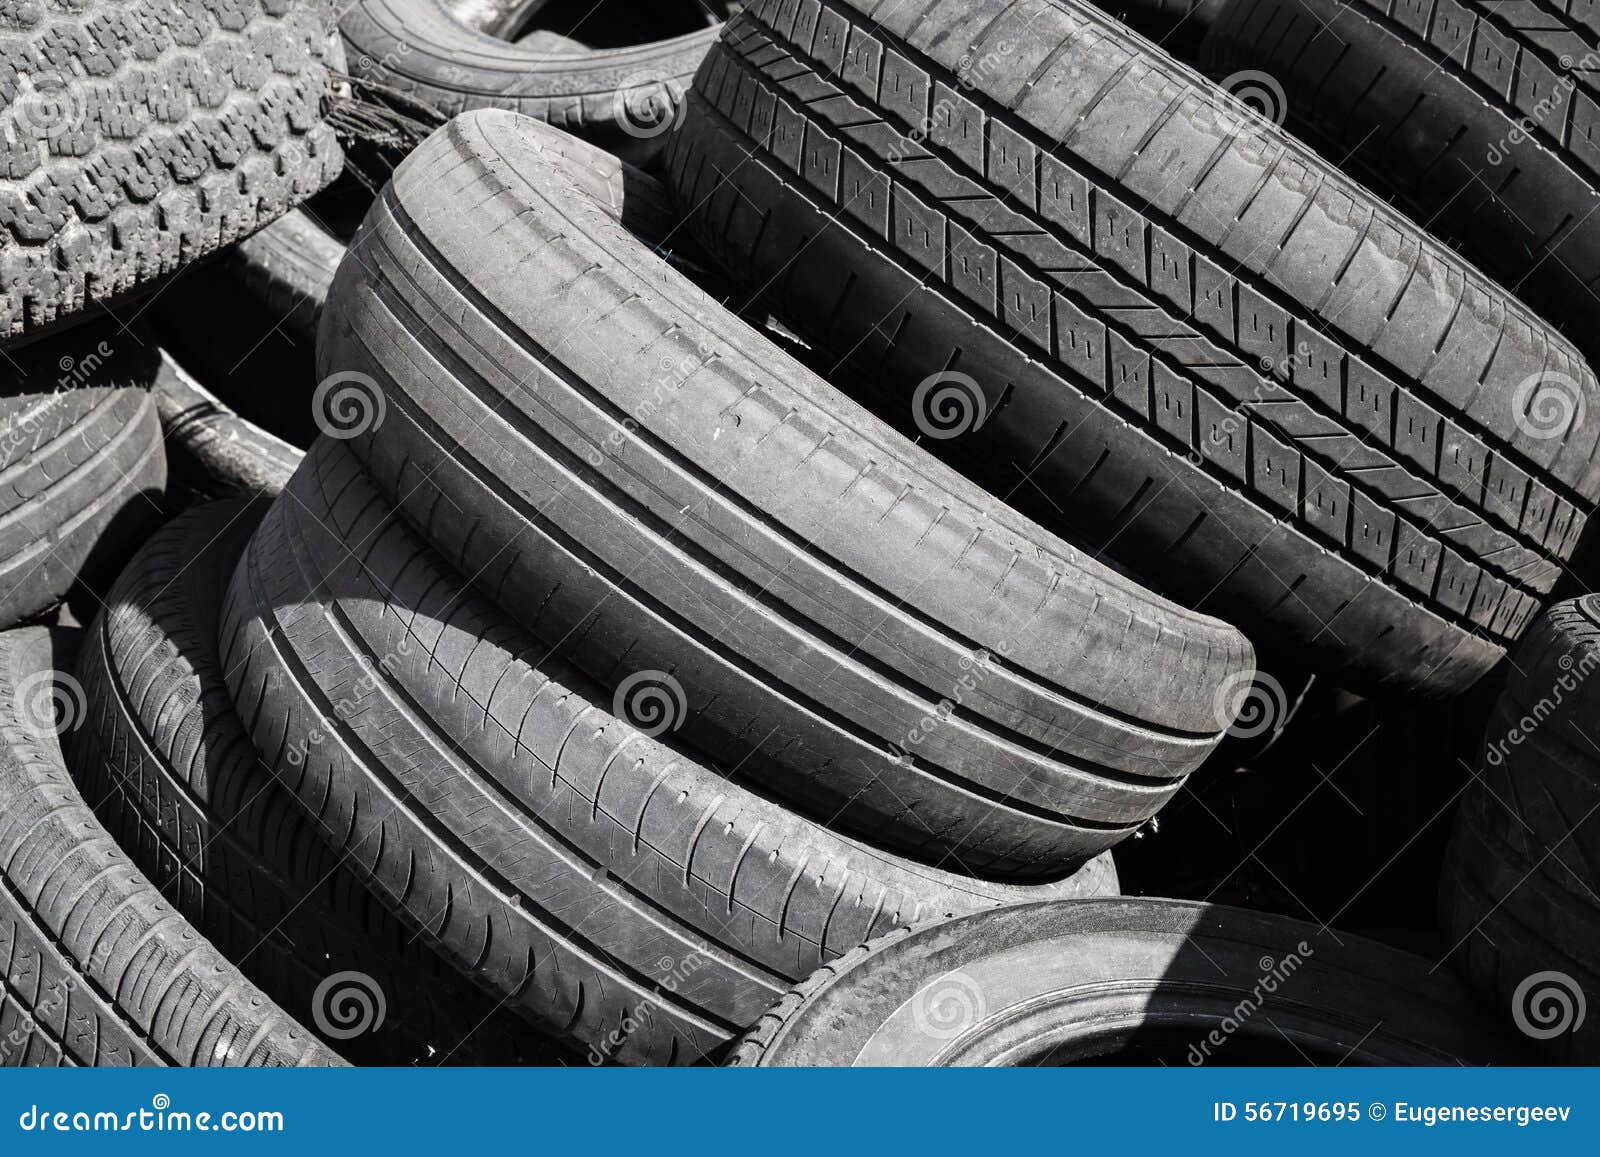 Heap of Used Worn-out Automotive Tires Stock Image